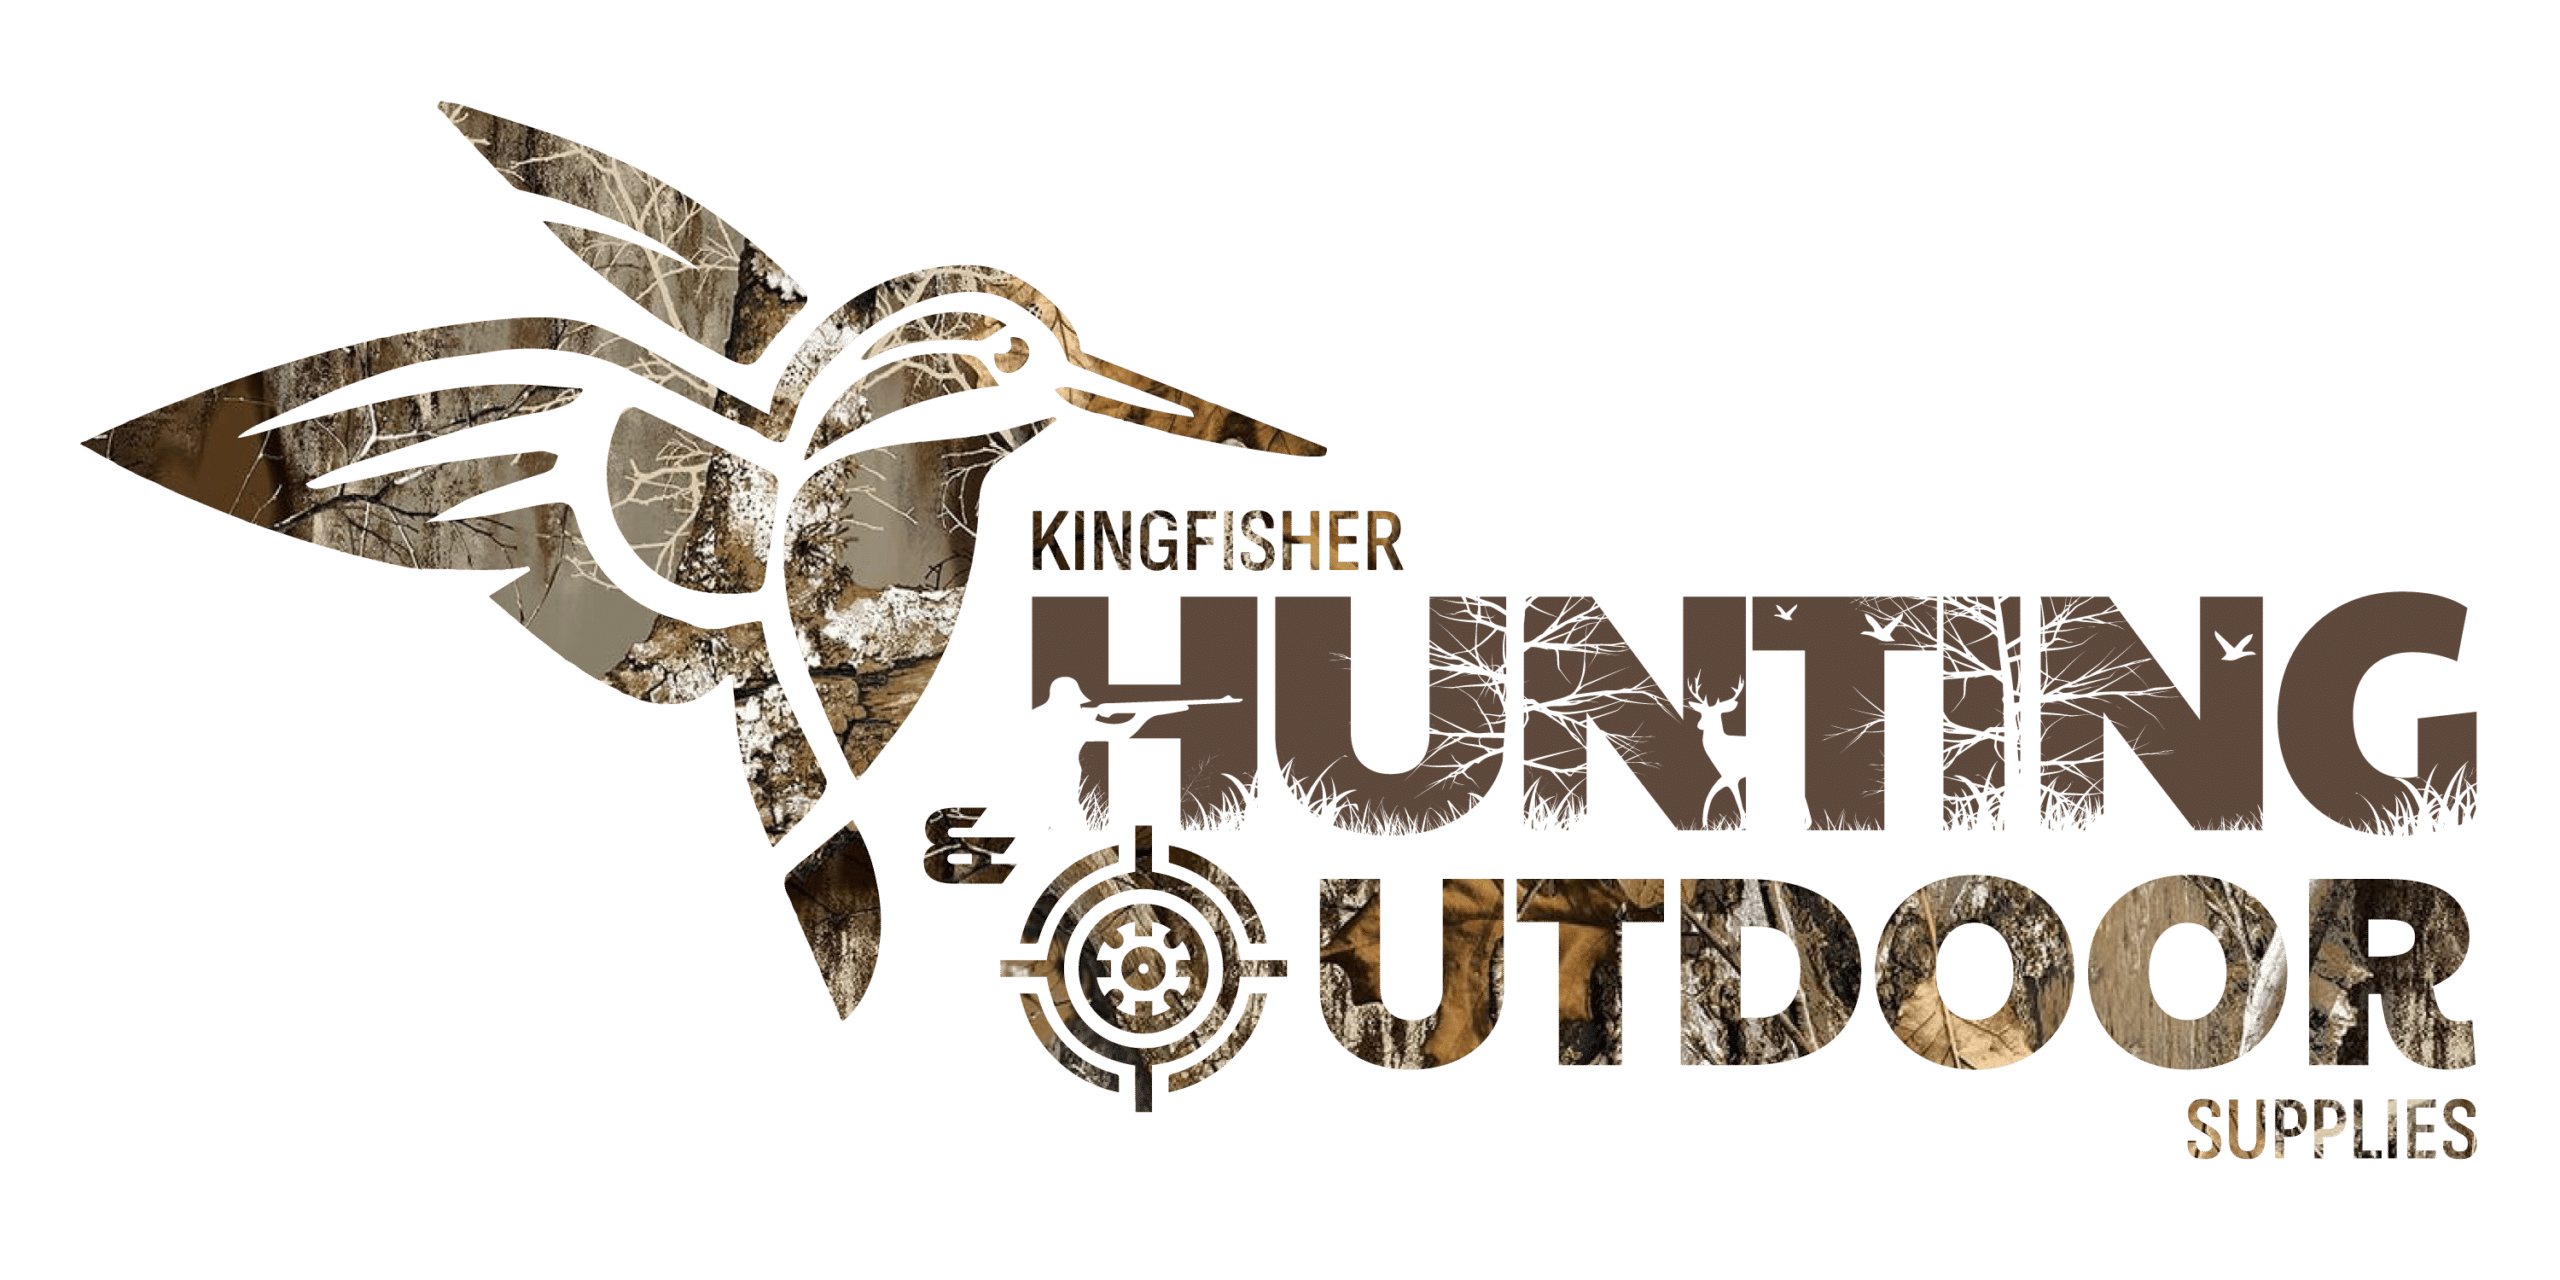 Kingfisher Hunting and Outdoor Supplies logo